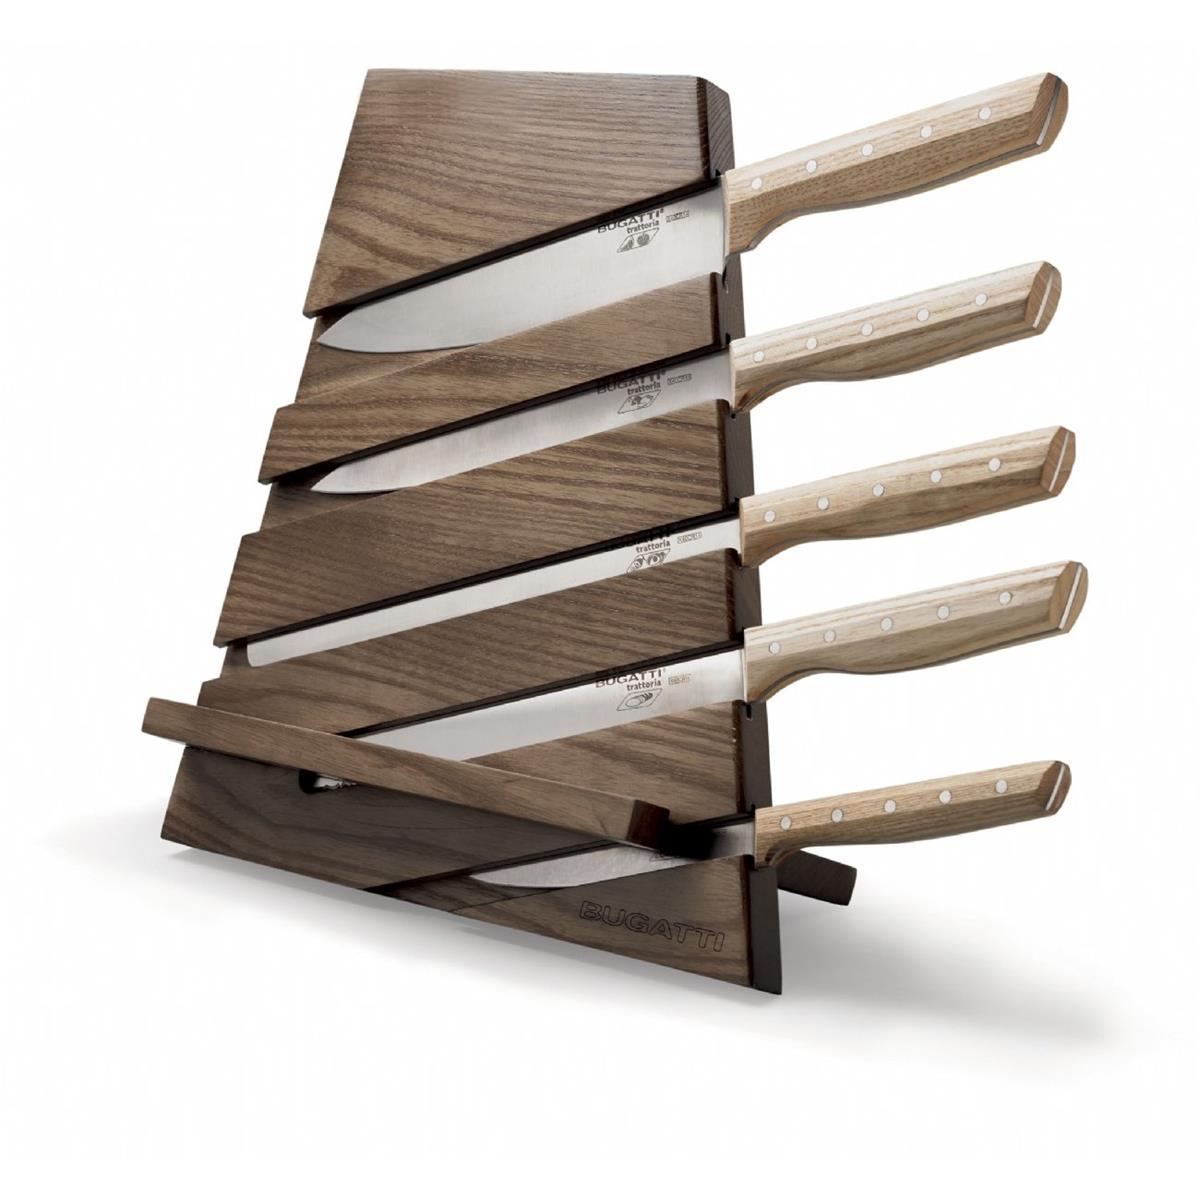 CEPPO TRATTORIA - in Wood with Chopping Board and Lectern - 5 Knives with Wooden Handle - Tobacco C